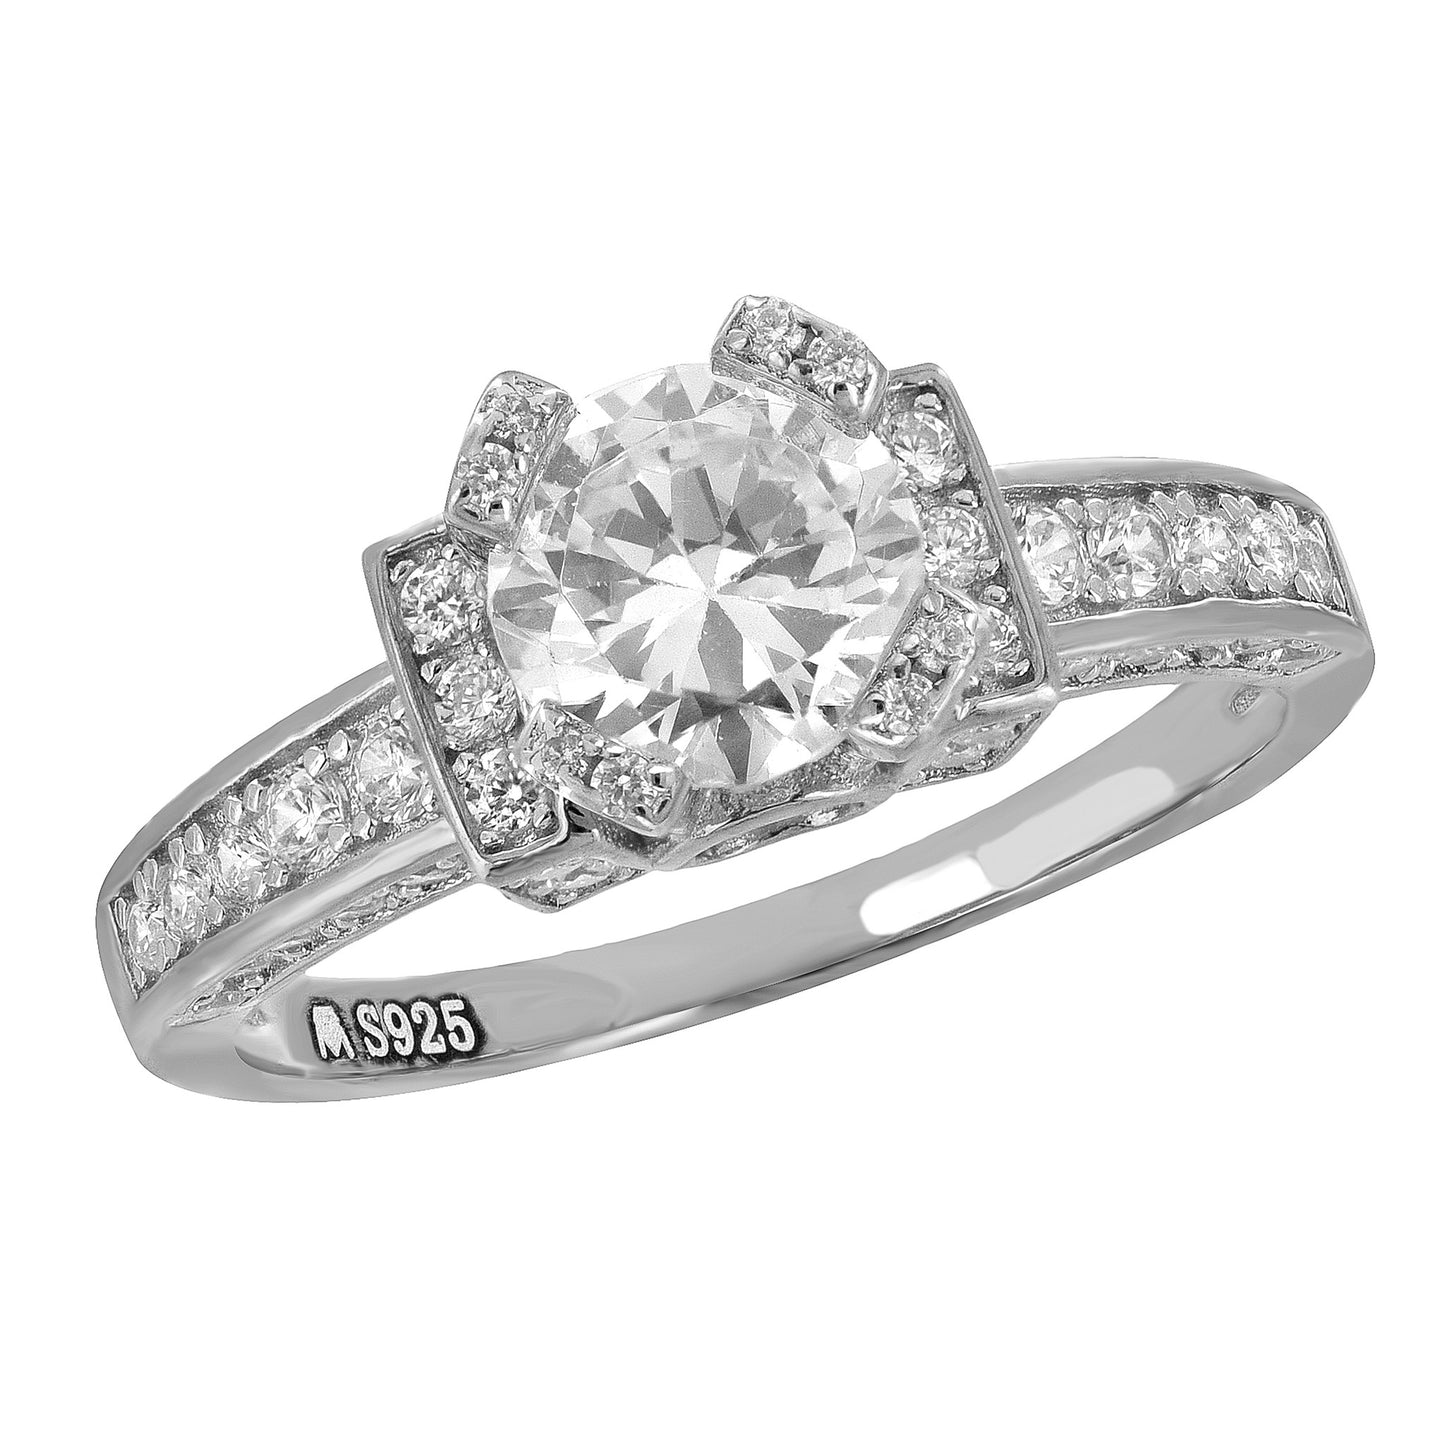 Solitaire Sterling Silver Ladies Ring Engagement Bridal Ring